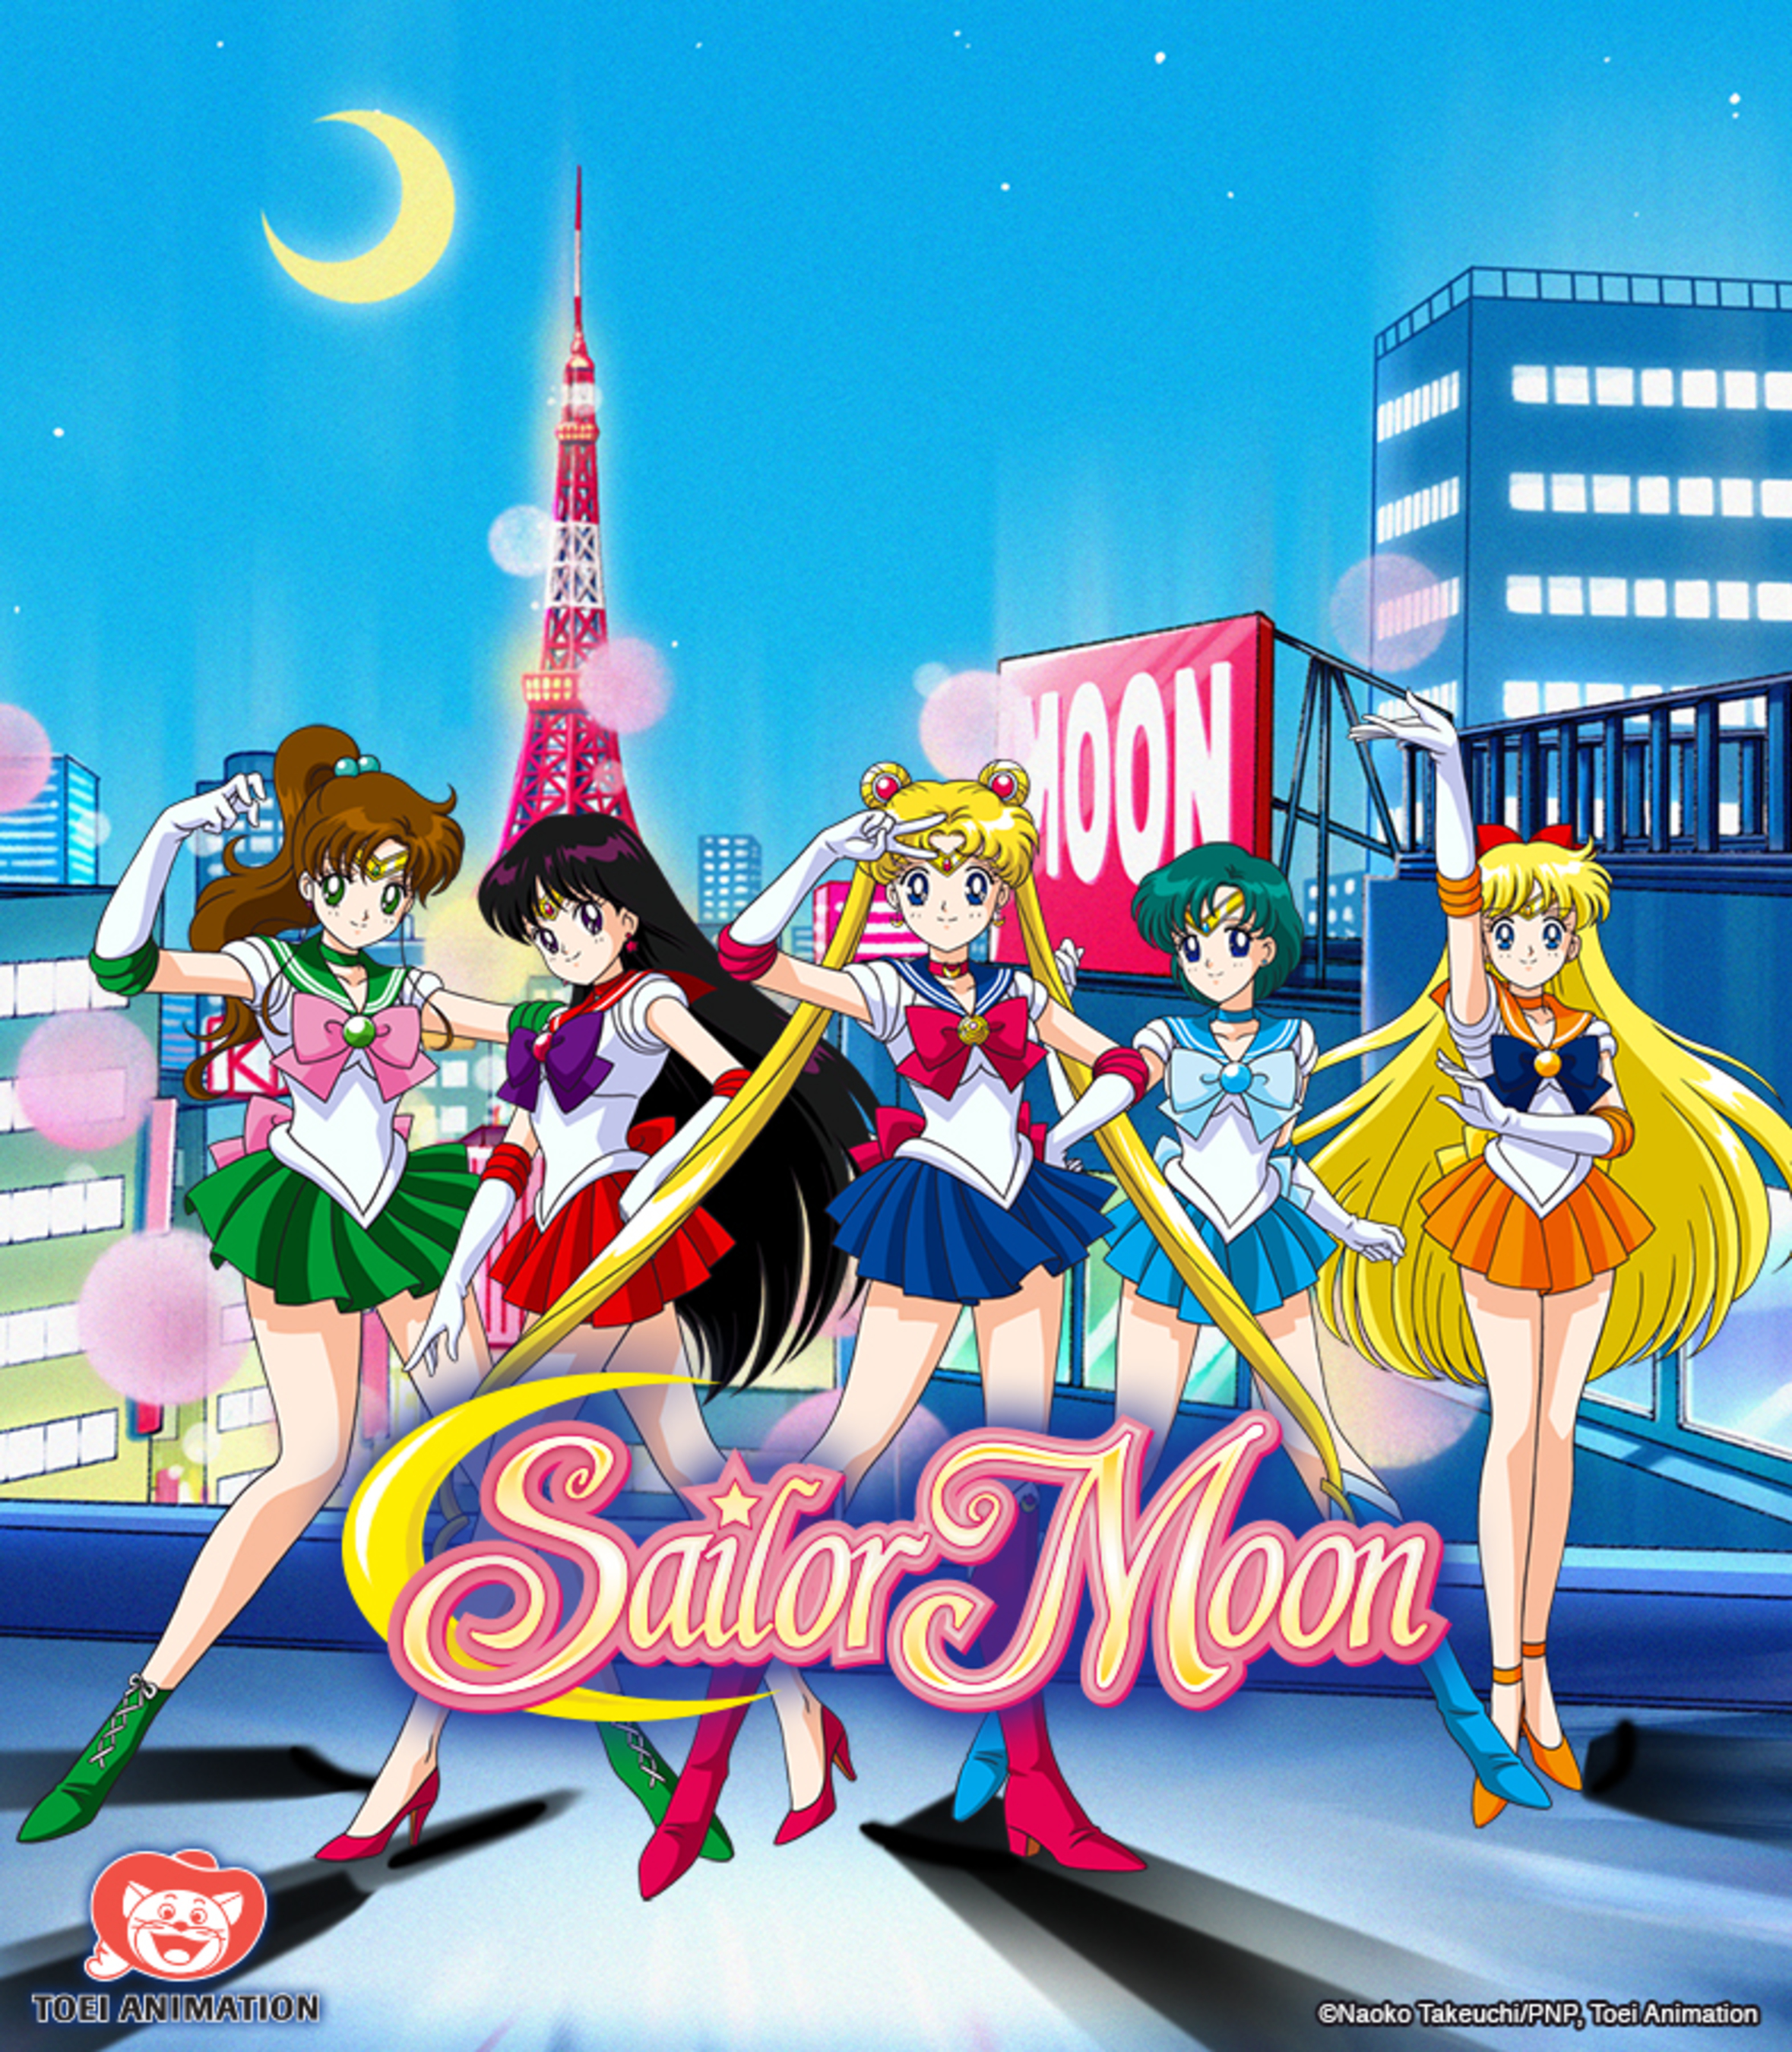 VIZ Media Acquires North American Rights For SAILOR MOON Anime Franchise